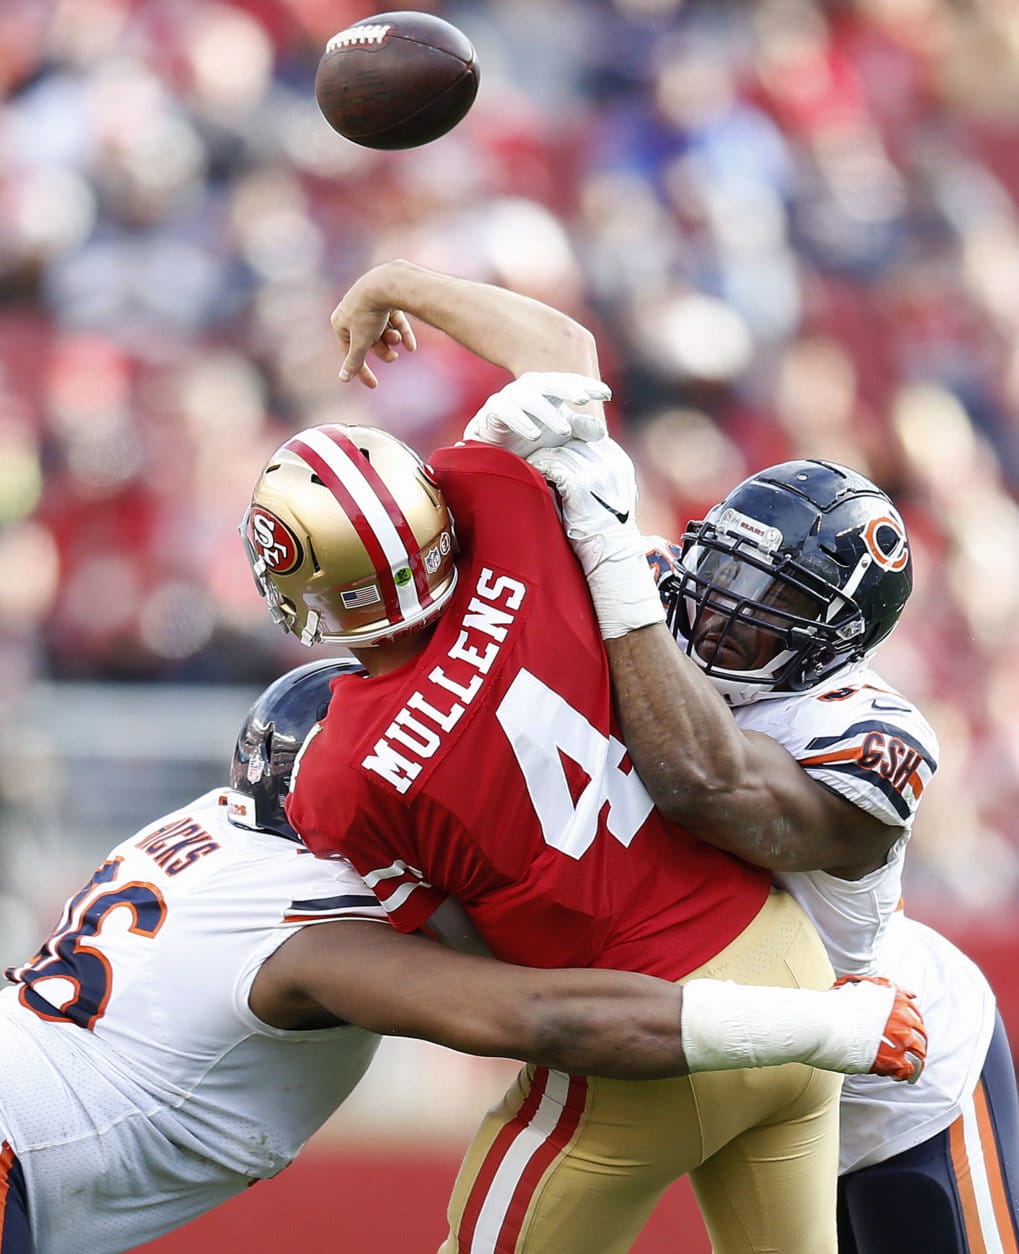 San Francisco 49ers quarterback Nick Mullens (4) is hit by Chicago Bears defensive end Akiem Hicks, left, and outside linebacker Khalil Mack during the second half of an NFL football game in Santa Clara, Calif., Sunday, Dec. 23, 2018. (AP Photo/D. Ross Cameron)